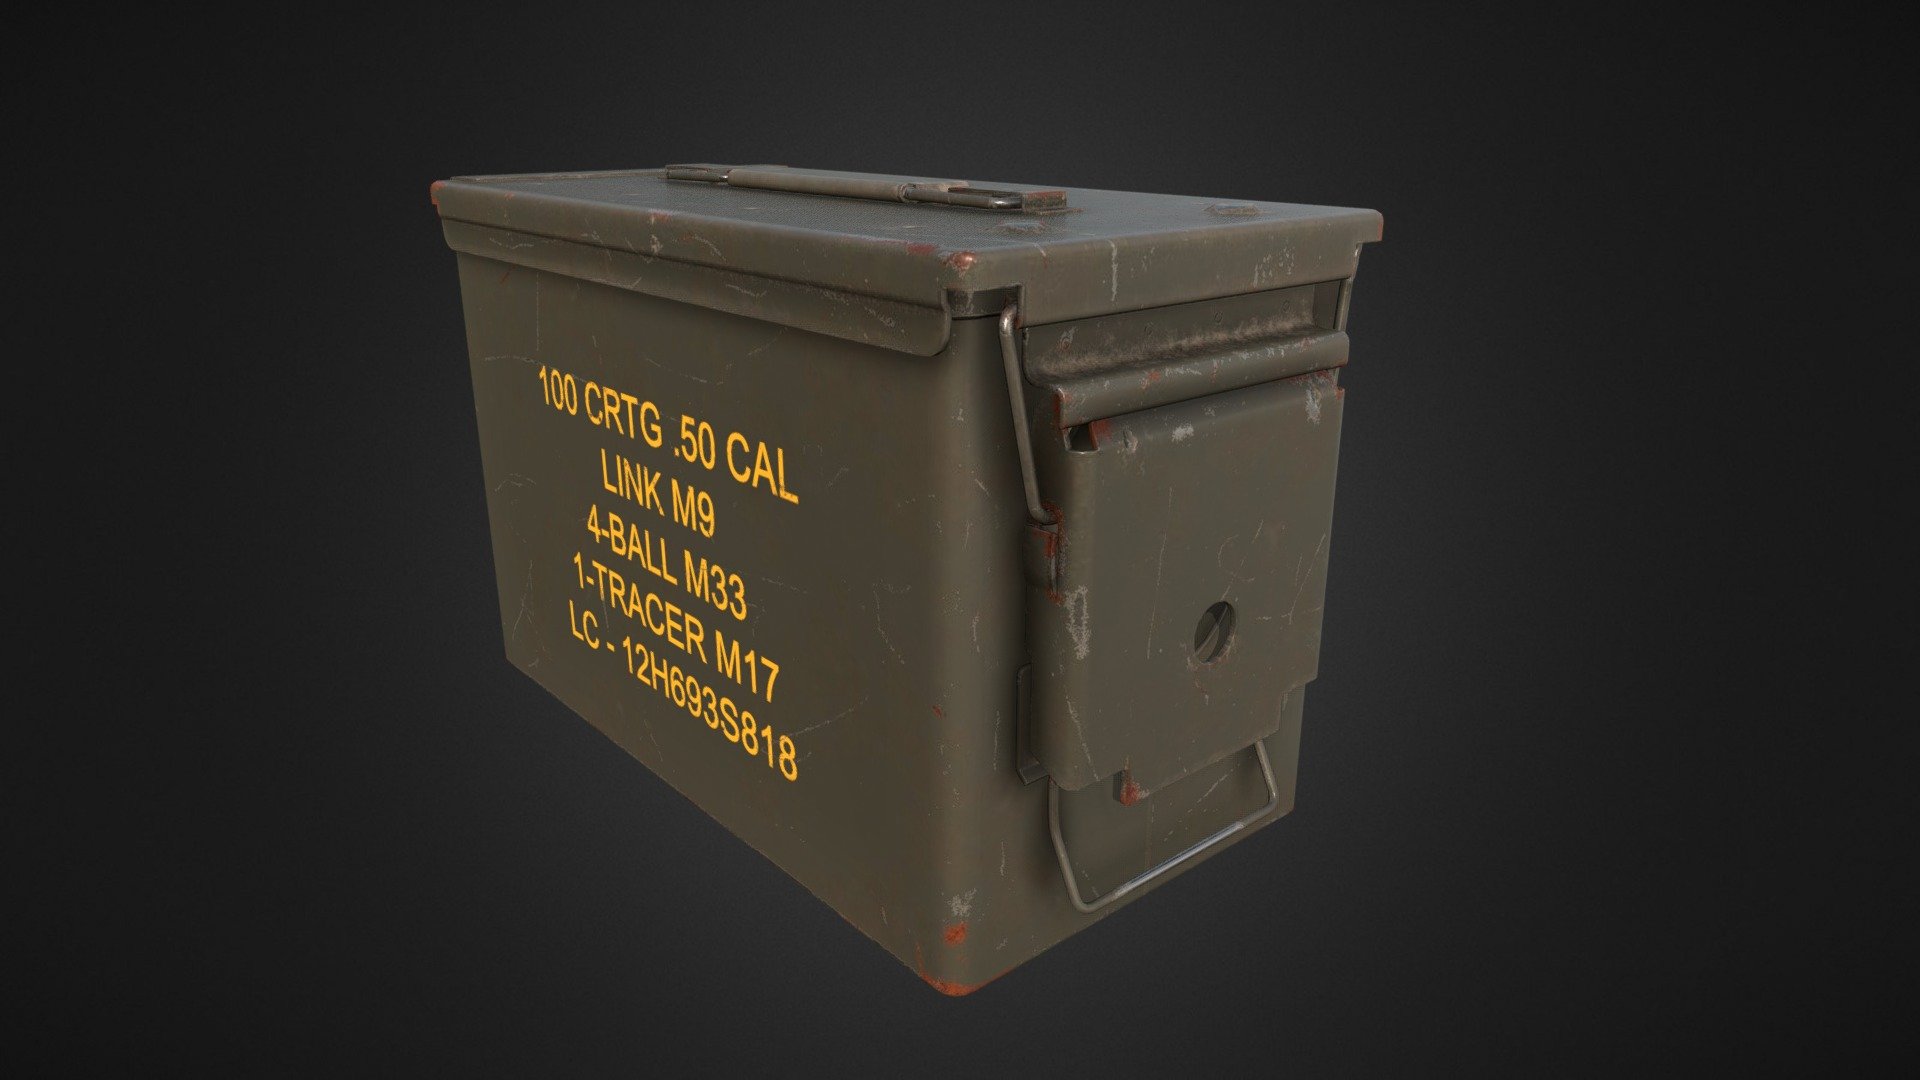 Military ammo box for 100 linked .50 Cal rounds. 
A little bit worn, but serves good 3d model